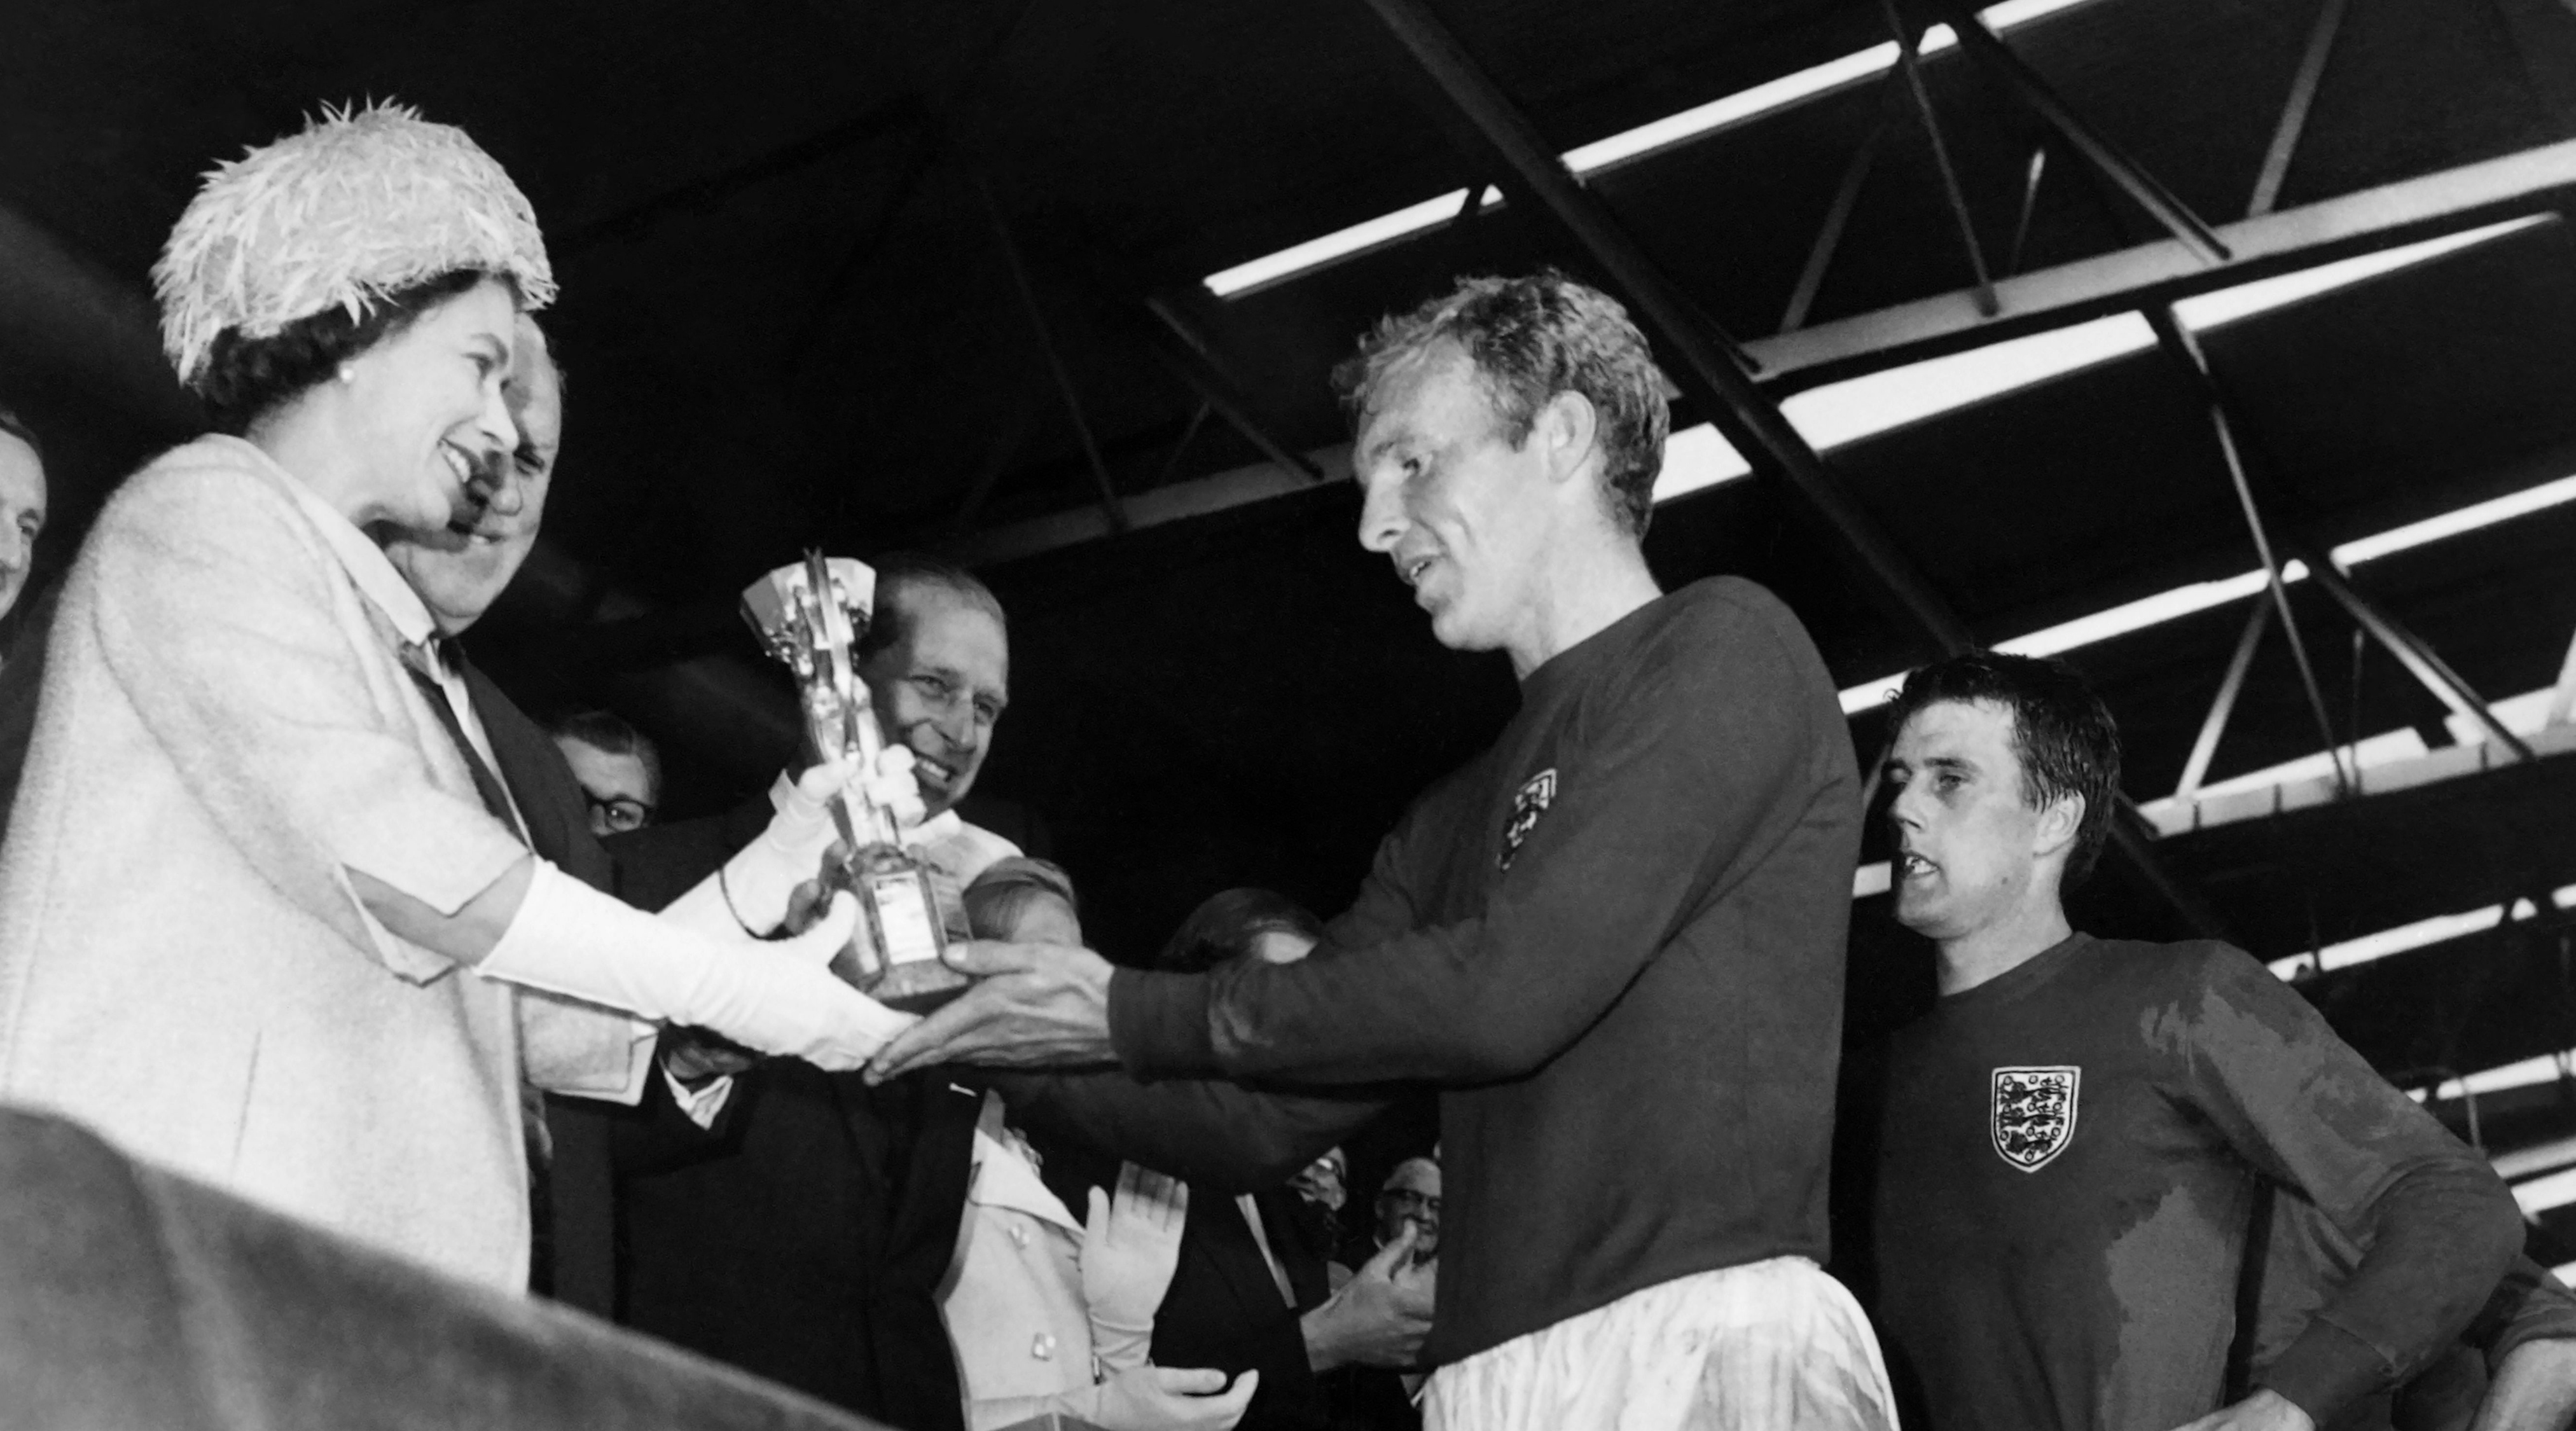 England captain Bobby Moore receives the Jules Rimet trophy after England beat West Germany 4-2 after extra time in the 1966 World Cup final at Wembley Stadium, London on July 30, 1966.